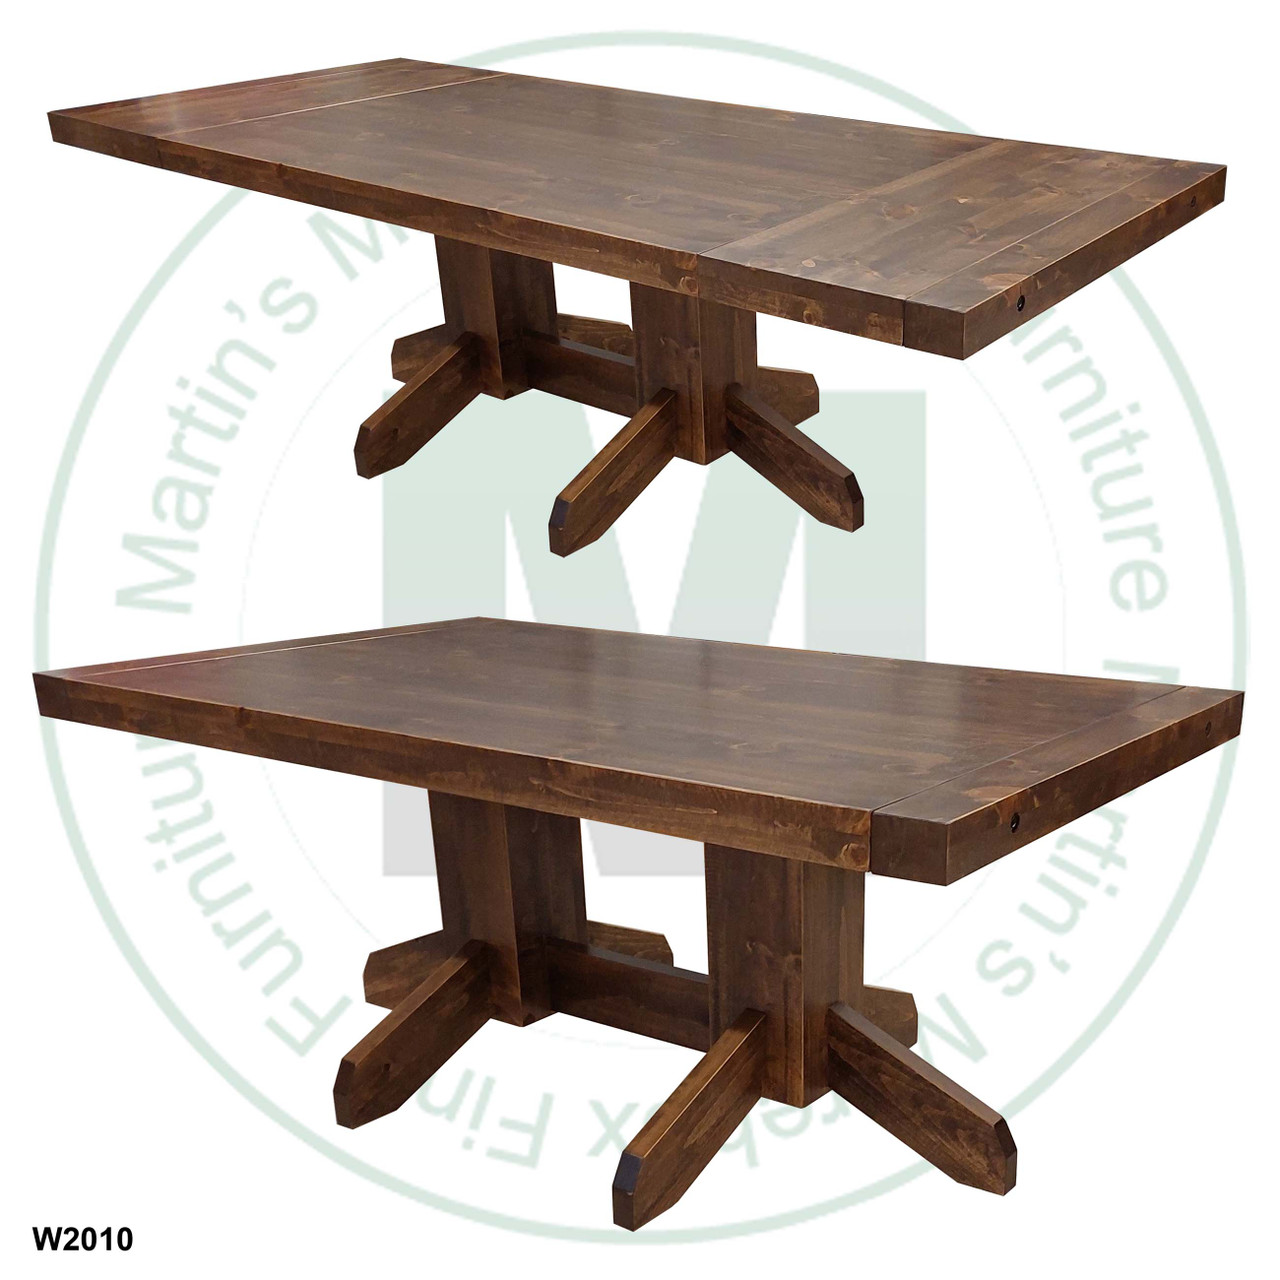 Maple Yukon Solid Top Double Pedestal Table 42'' Deep x 72'' Wide x 30'' High With 2 - 16'' End Leaves